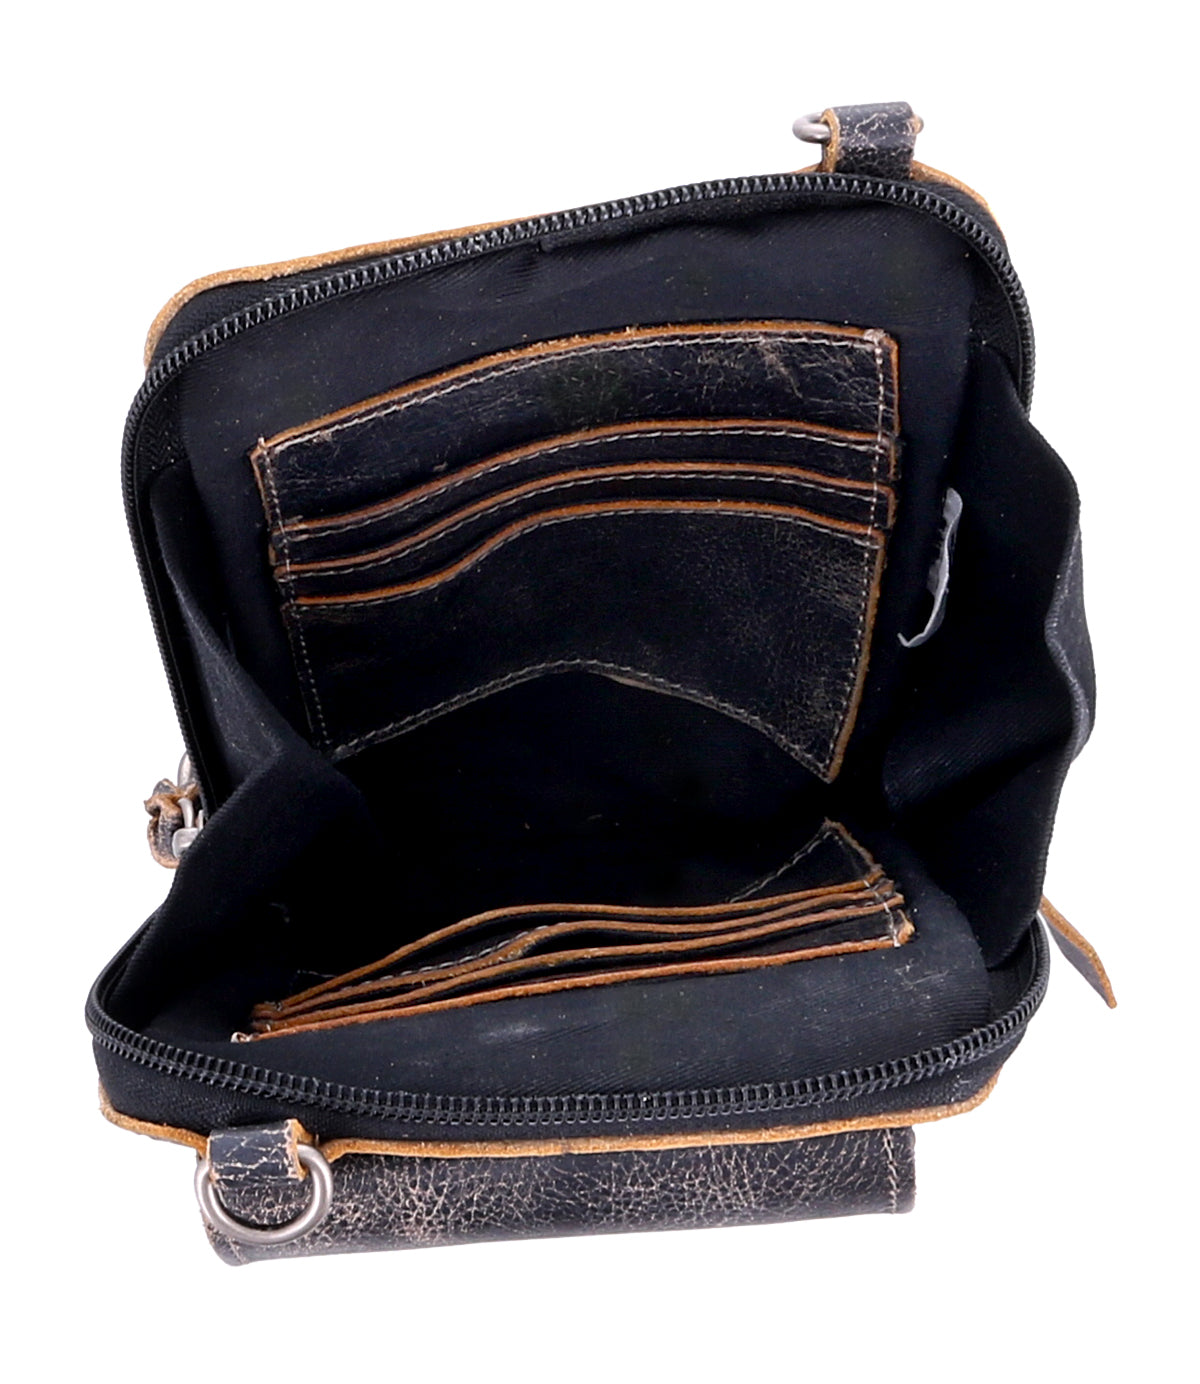 A Bed Stu Alelike leather wallet with two compartments.